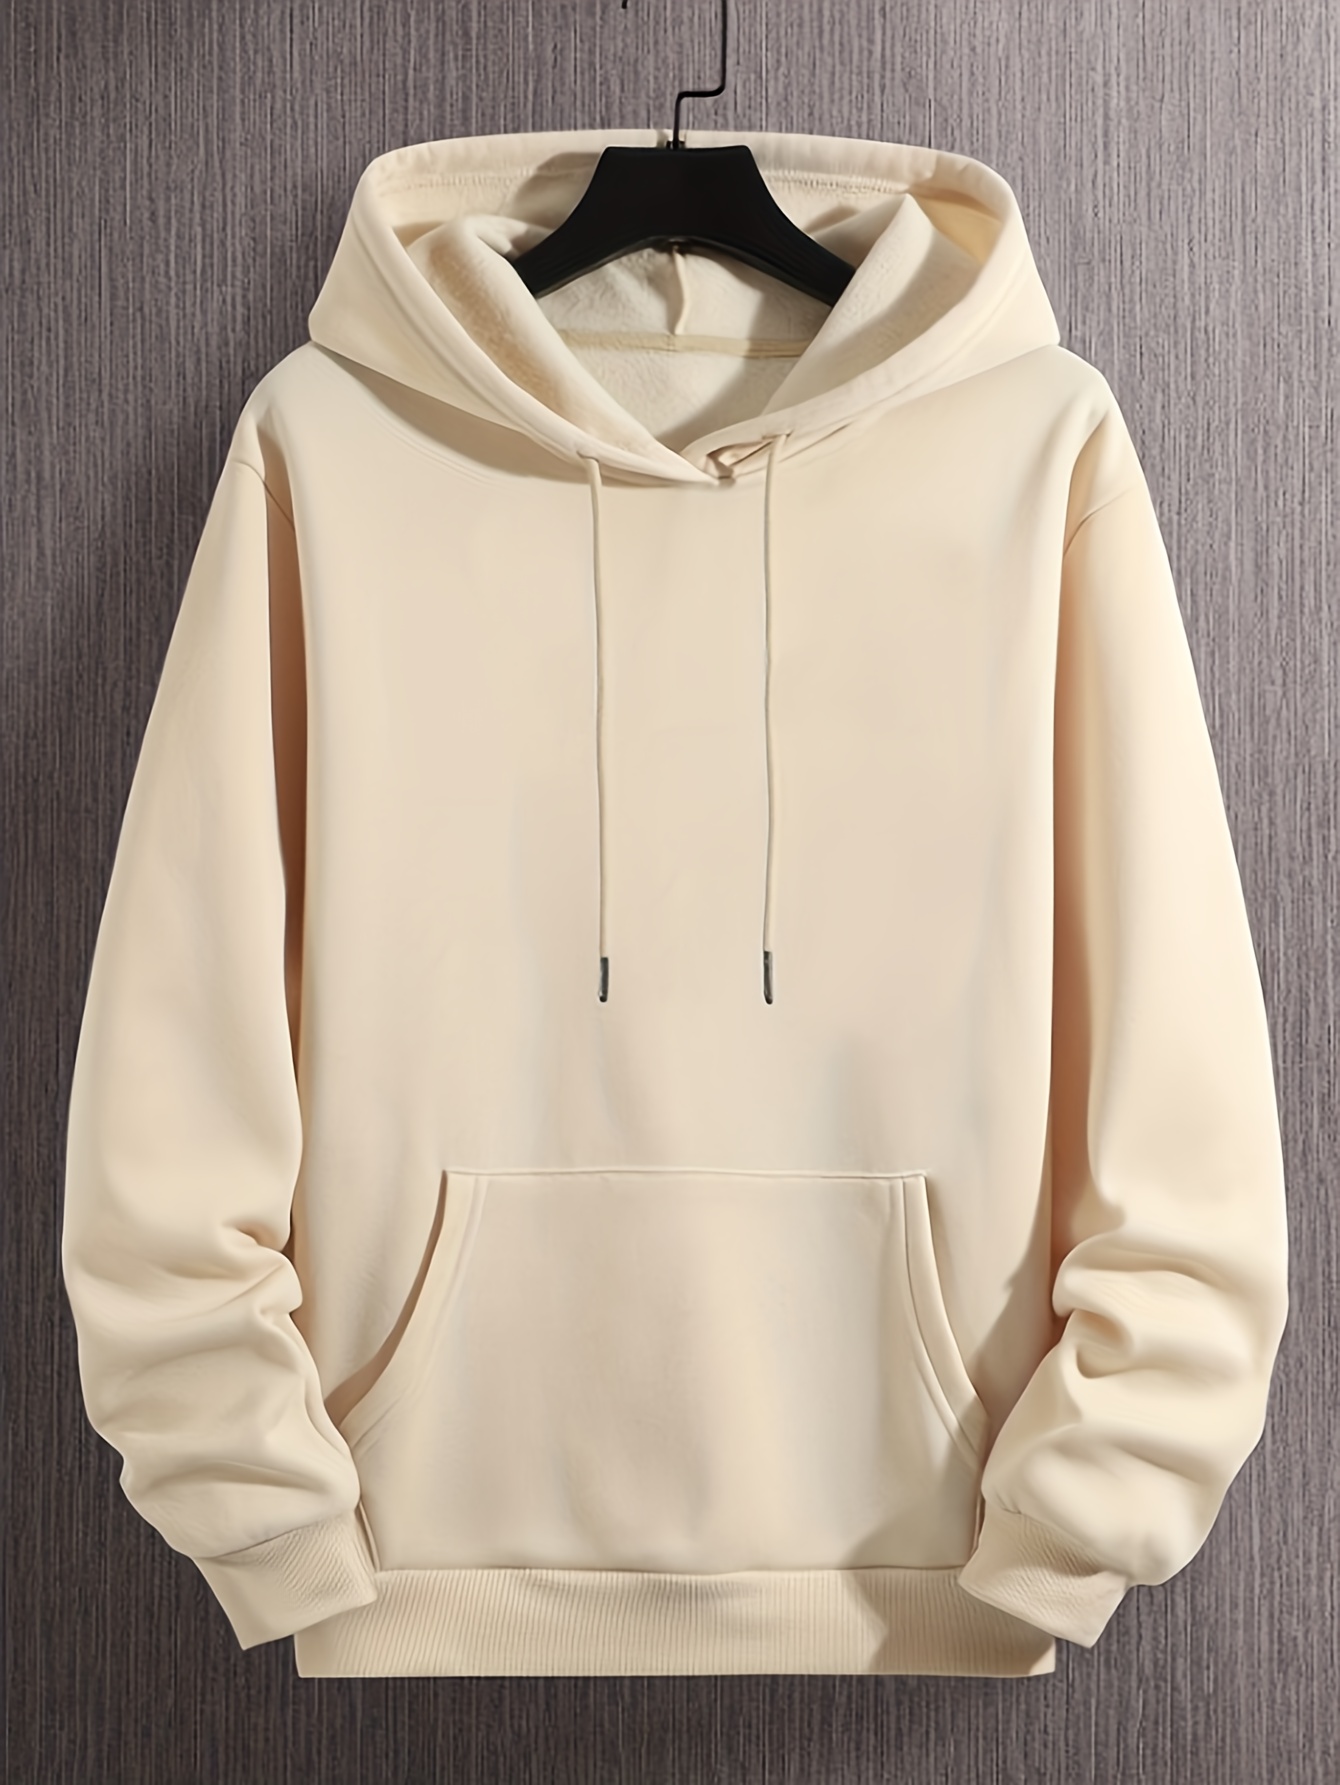 solid color hoodies, solid color hoodies for men graphic hoodie with kangaroo pocket comfy loose drawstring trendy hooded pullover mens clothing for autumn winter details 11